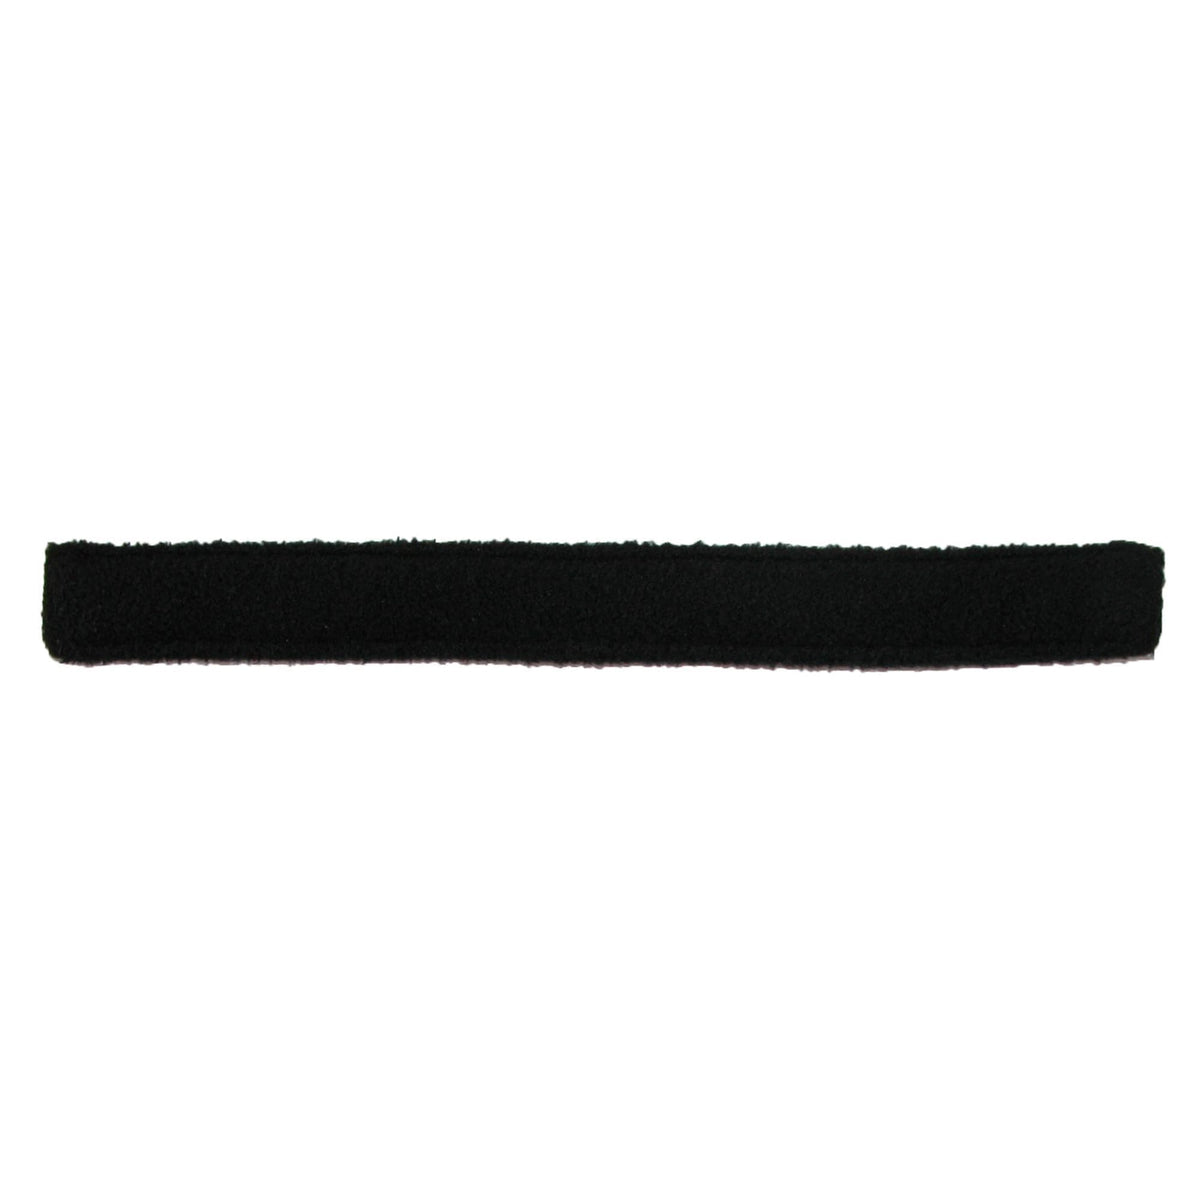 Ascentix Cotton Twill Disposable Hat Size Reducer And Sweatband